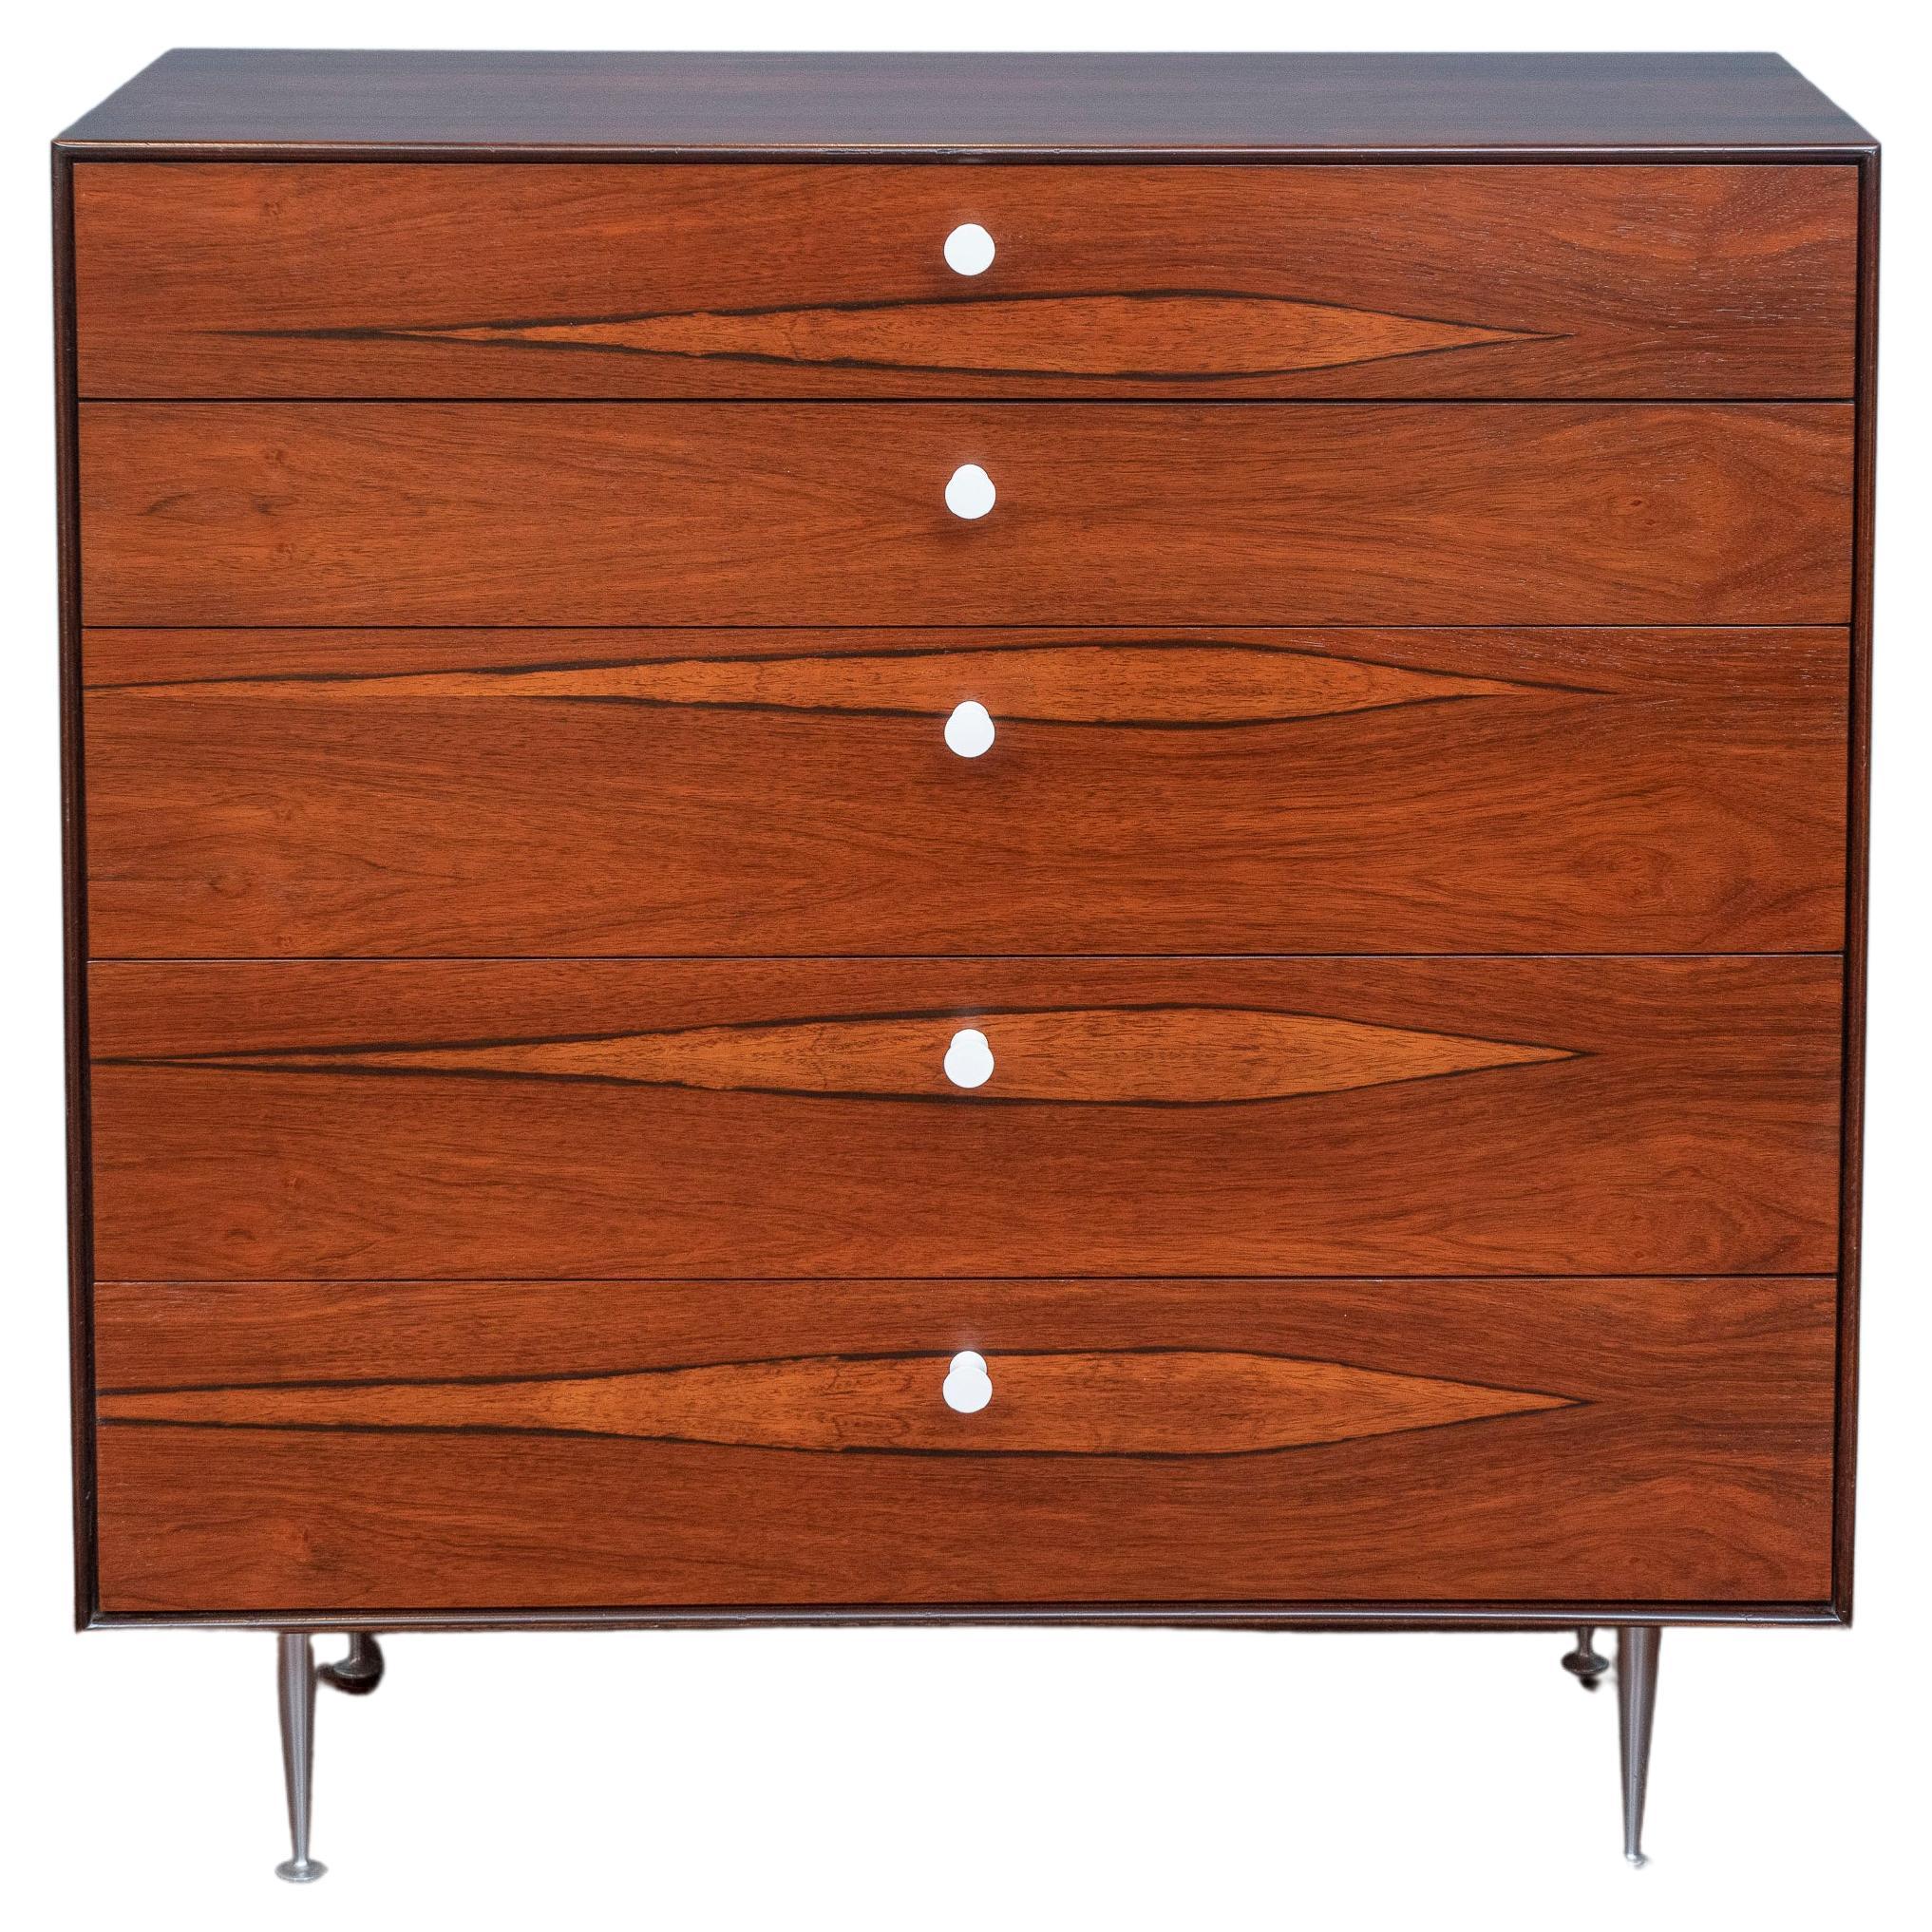 George Nelson Rosewood Thin Edge Dresser For Sale